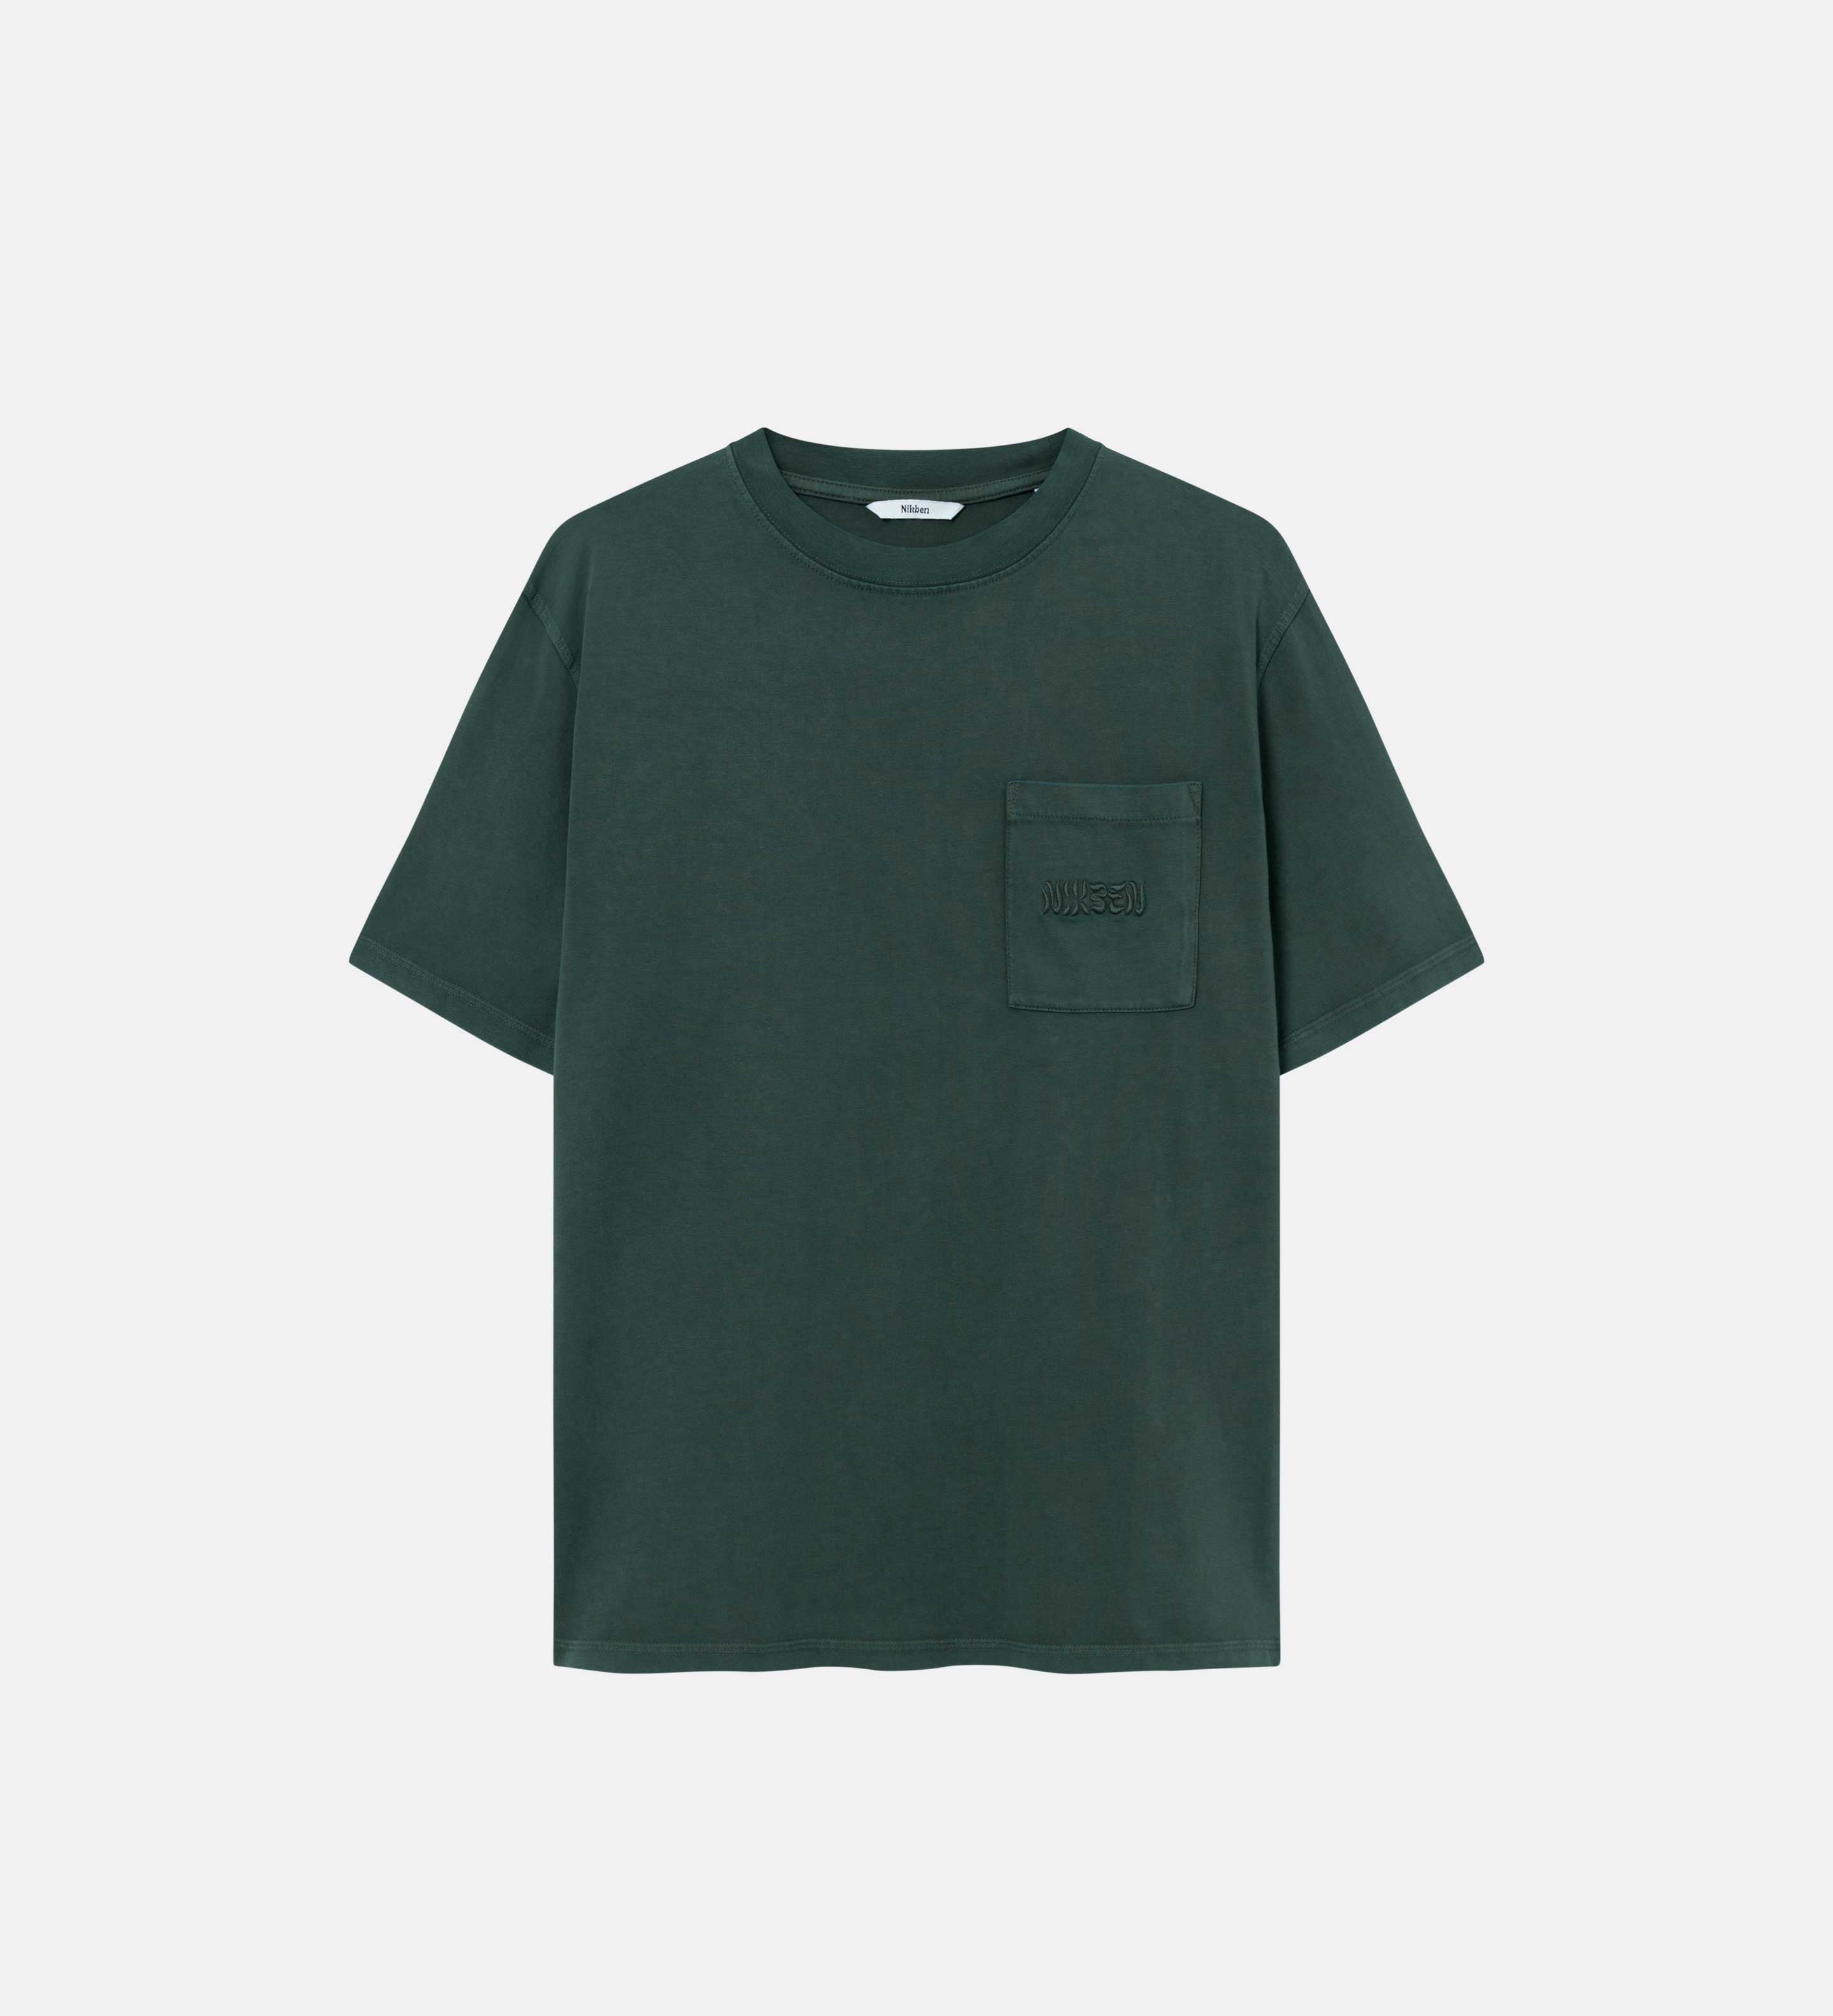 Washed green t-shirt with breast pocket and embroidered logo.